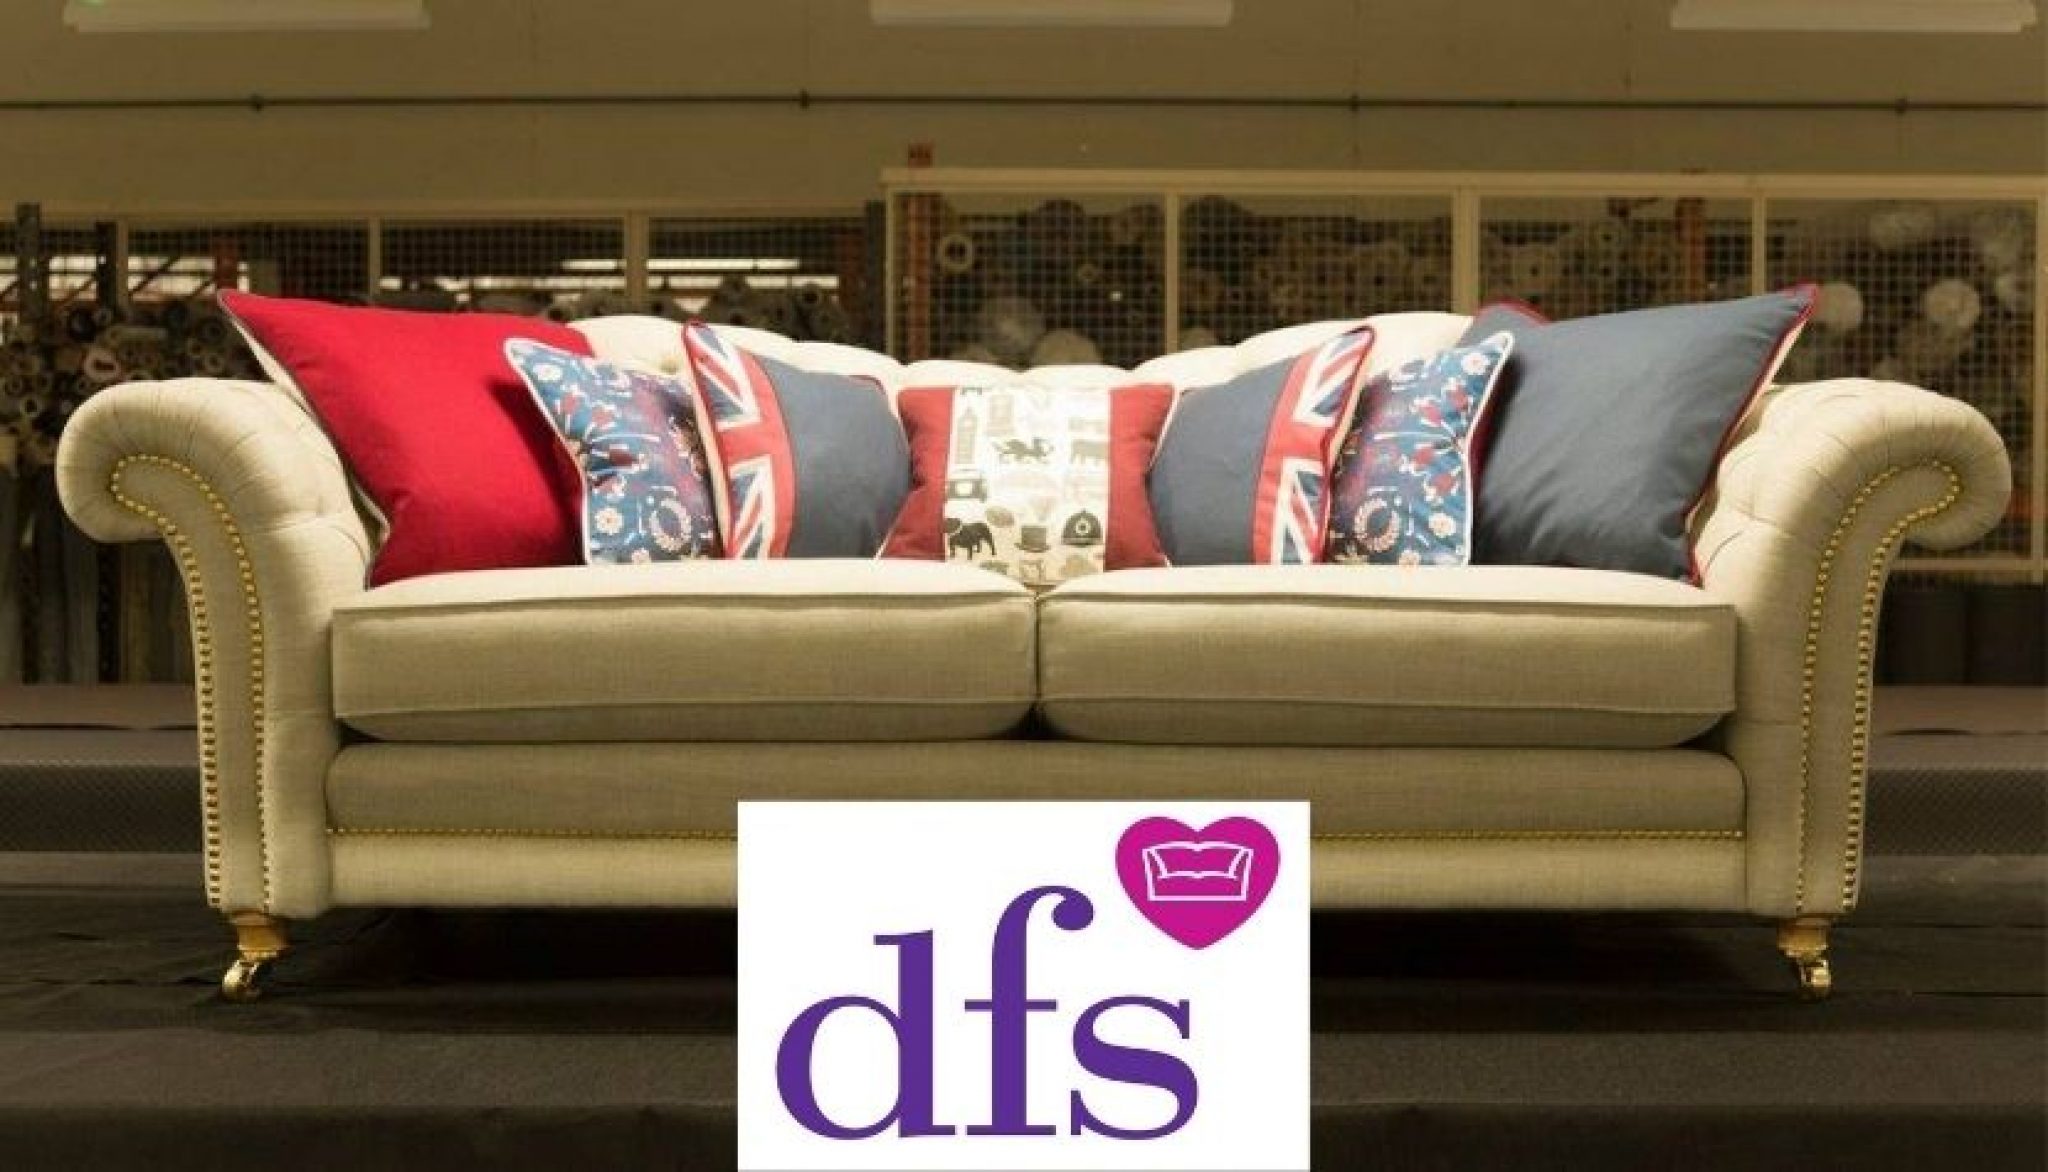 DFS Is There An Nhs Discount Code To Use NHS Discount Offers